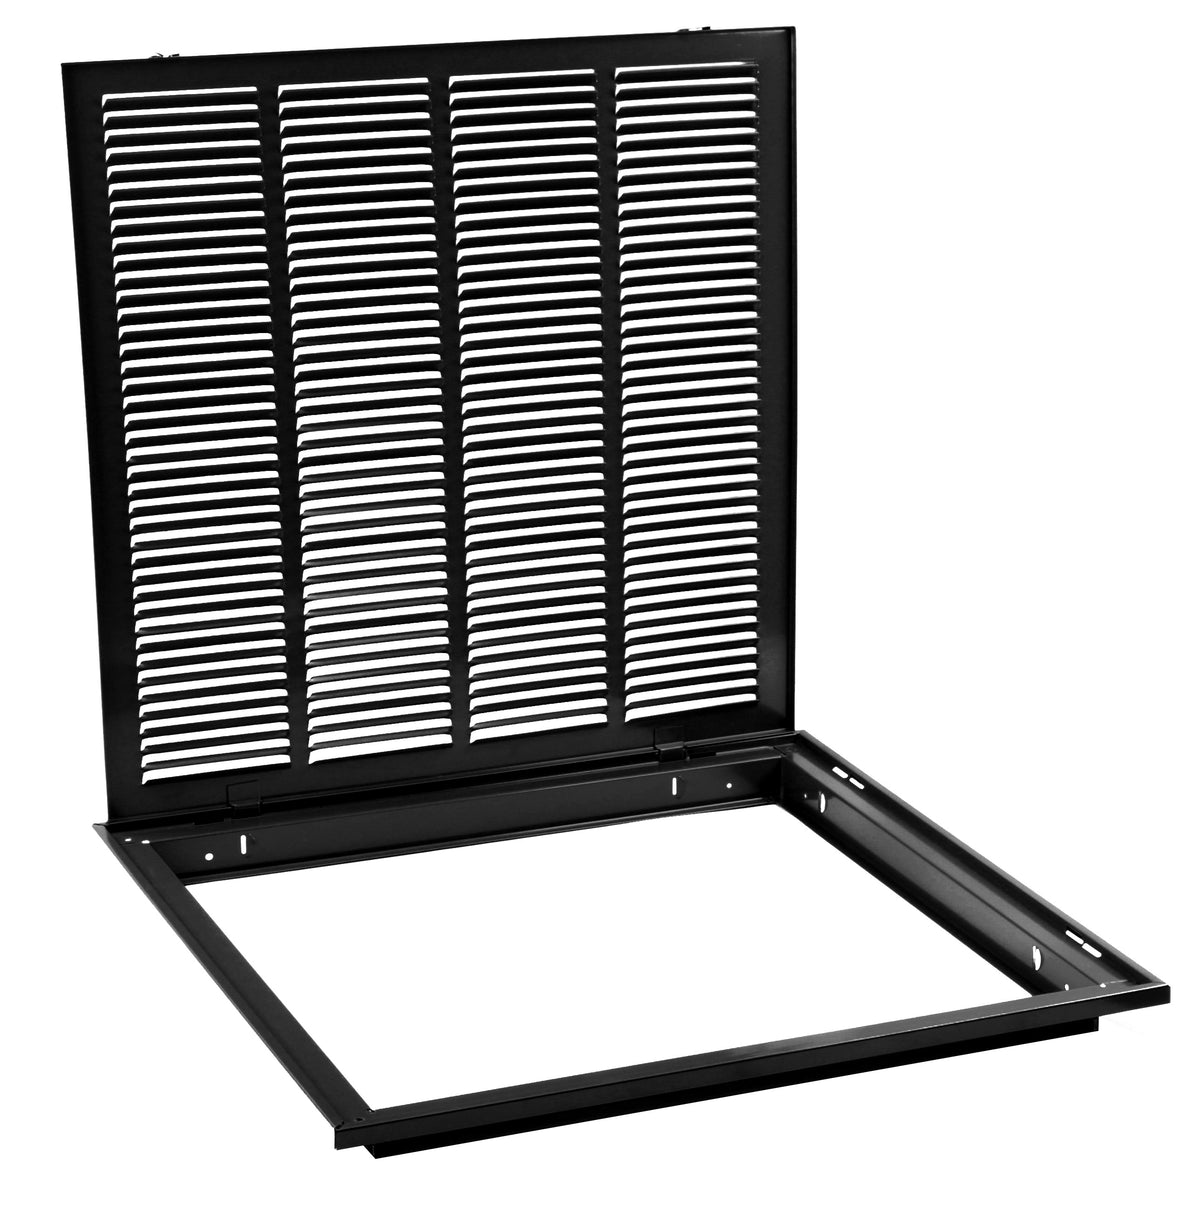 20&quot; X 25&quot; Steel Return Air Filter Grille for 1&quot; Filter - Removable Frame - Black - [Outer Dimensions: 22 5/8&quot; X 27 5/8&quot;]